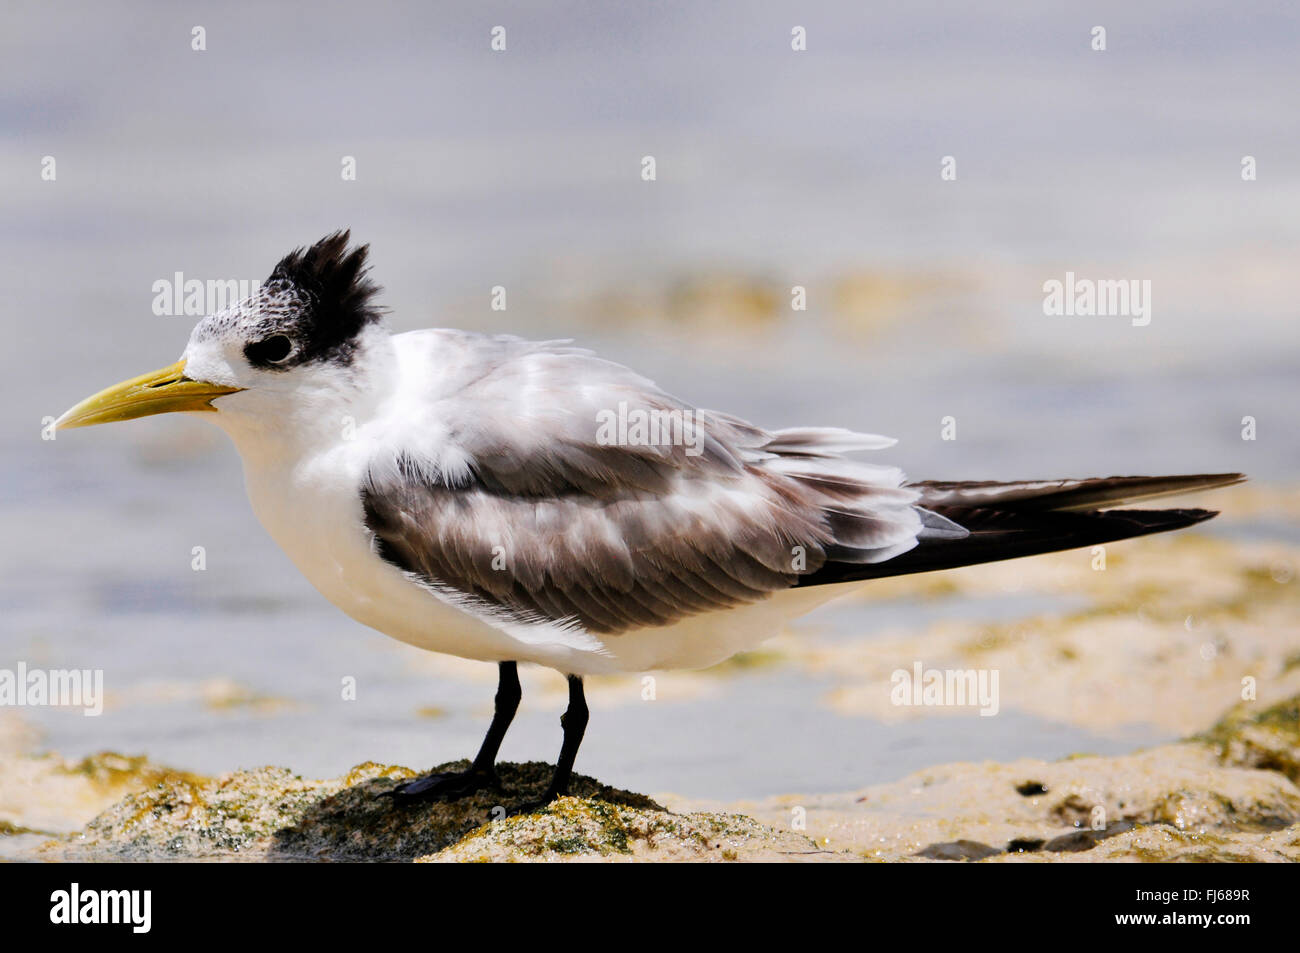 greater crested tern (Thalasseus bergii, Sterna bergii), juvenile greater crested tern on the beach, New Caledonia, Ile des Pins Stock Photo